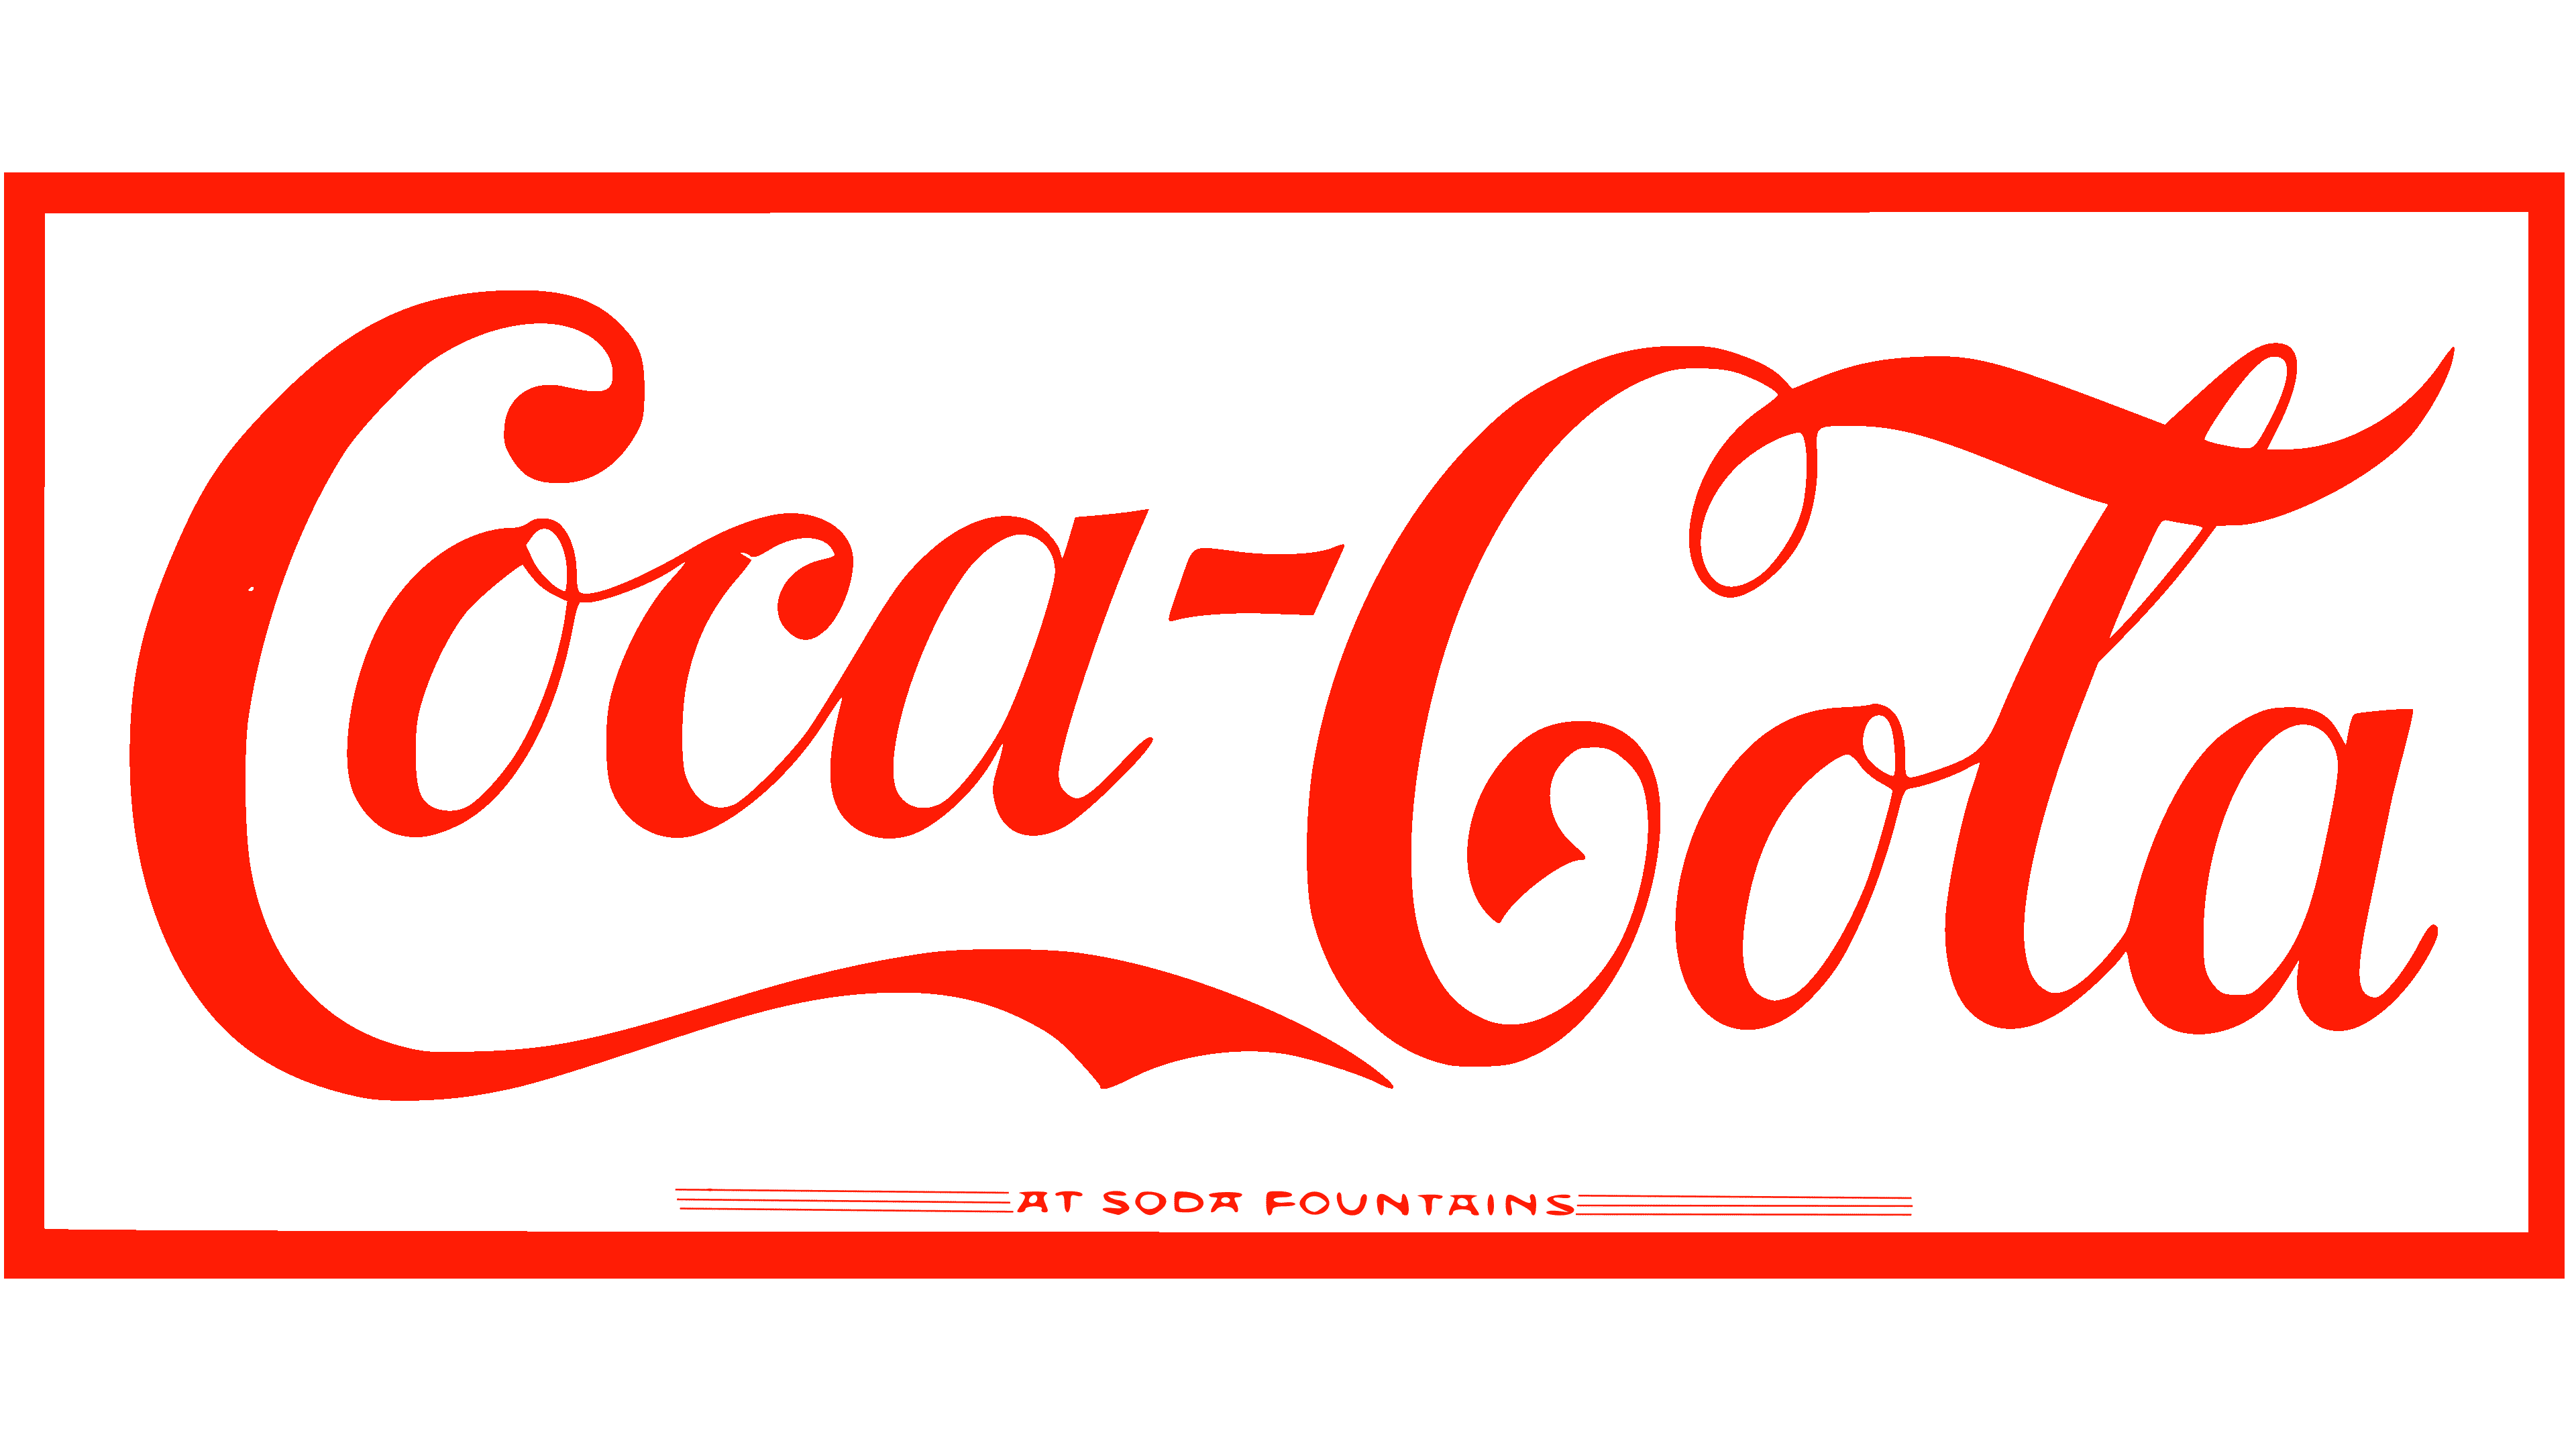 Top 99 coca cola logo original most viewed and downloaded - Wikipedia